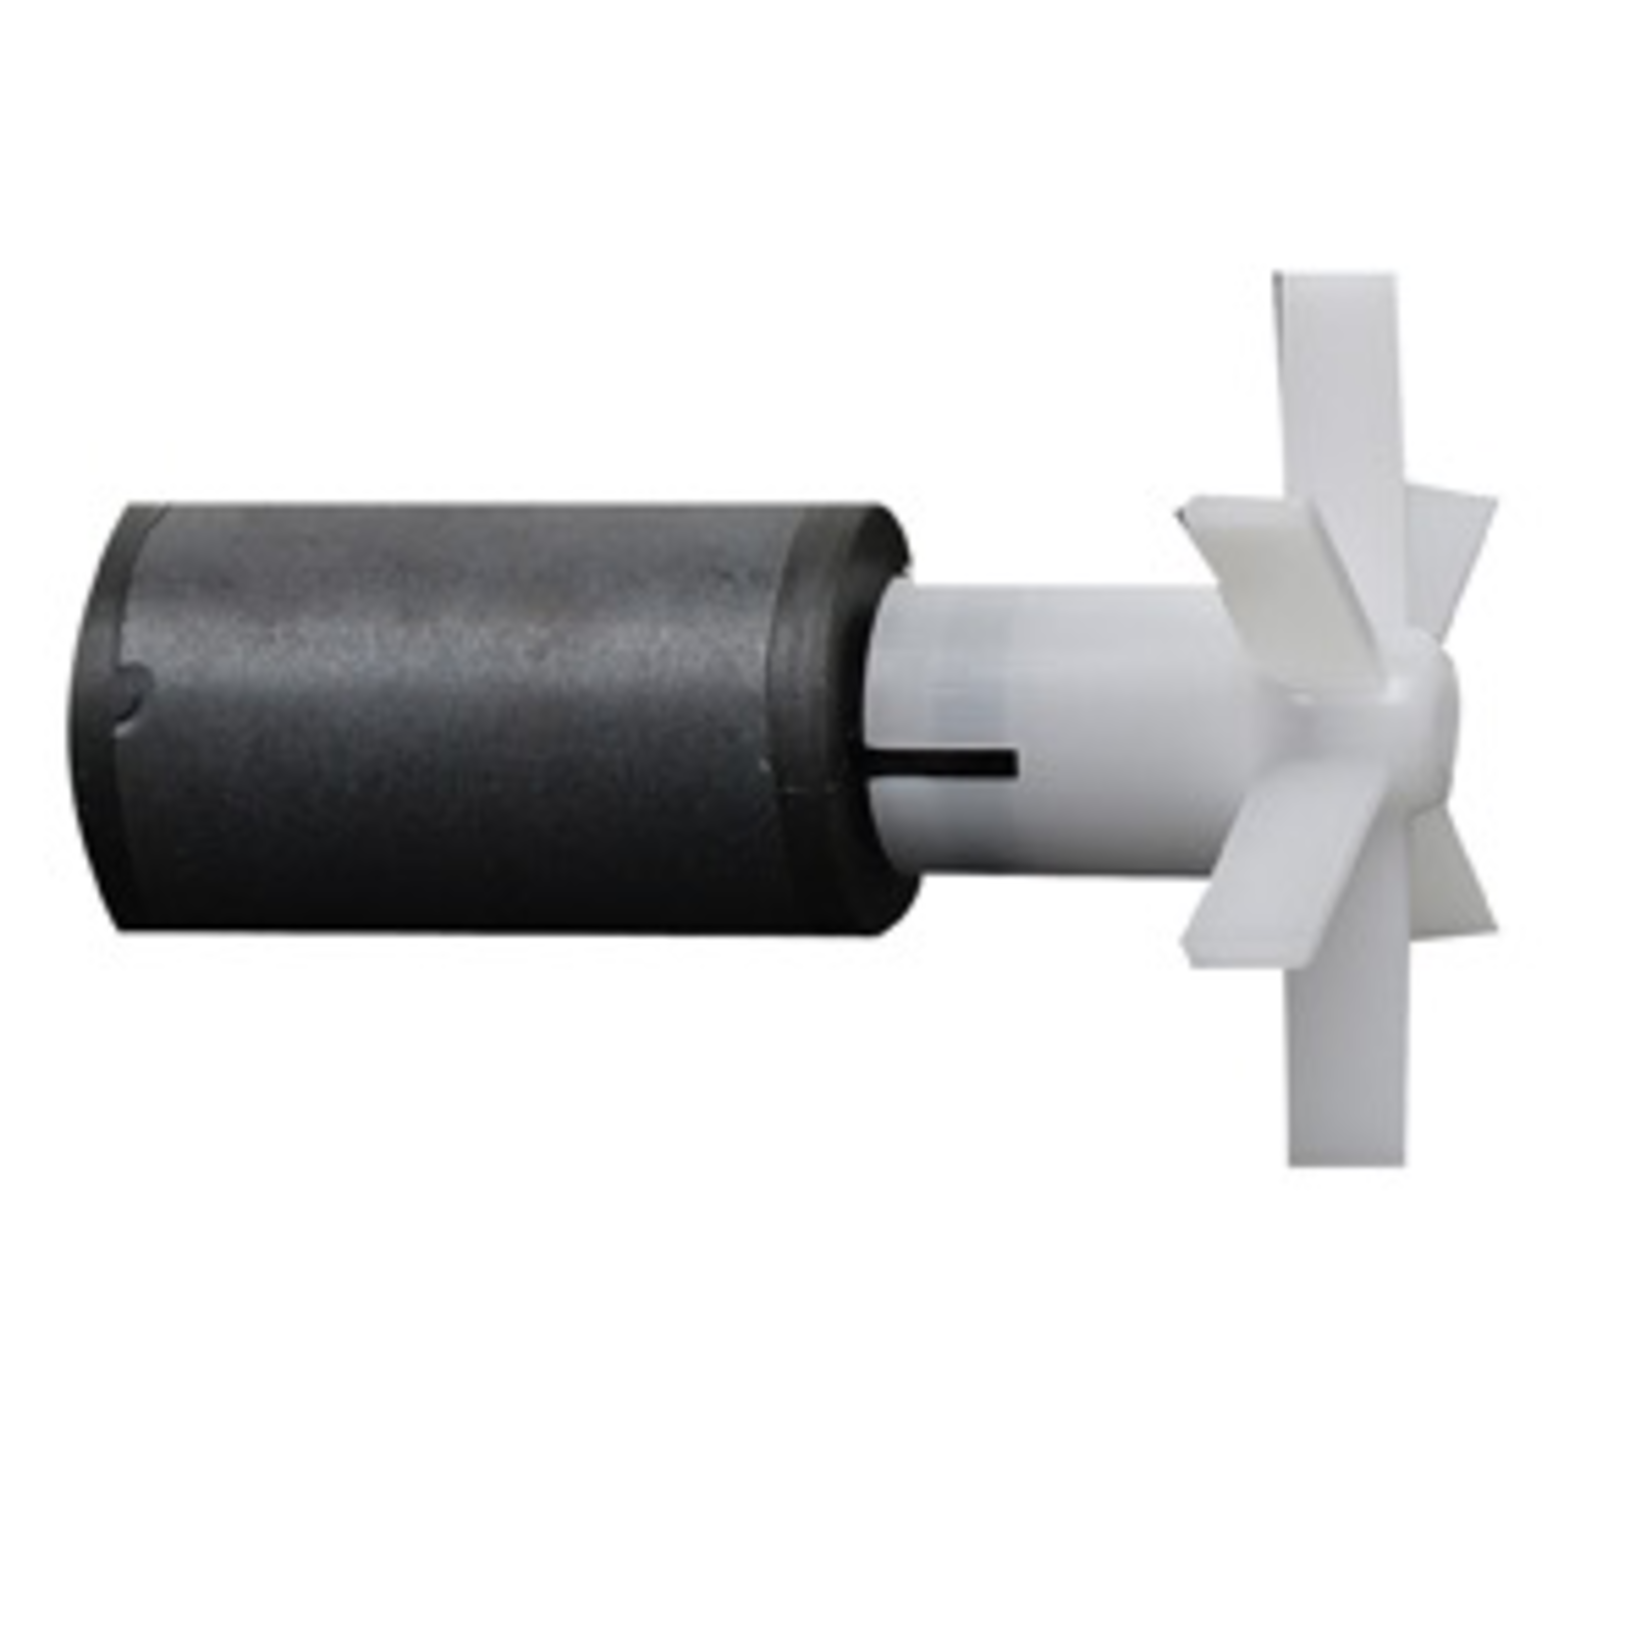 FLUVAL (W) Fluval 406 Magnetic Impeller with Shaft and Rubber Bushing